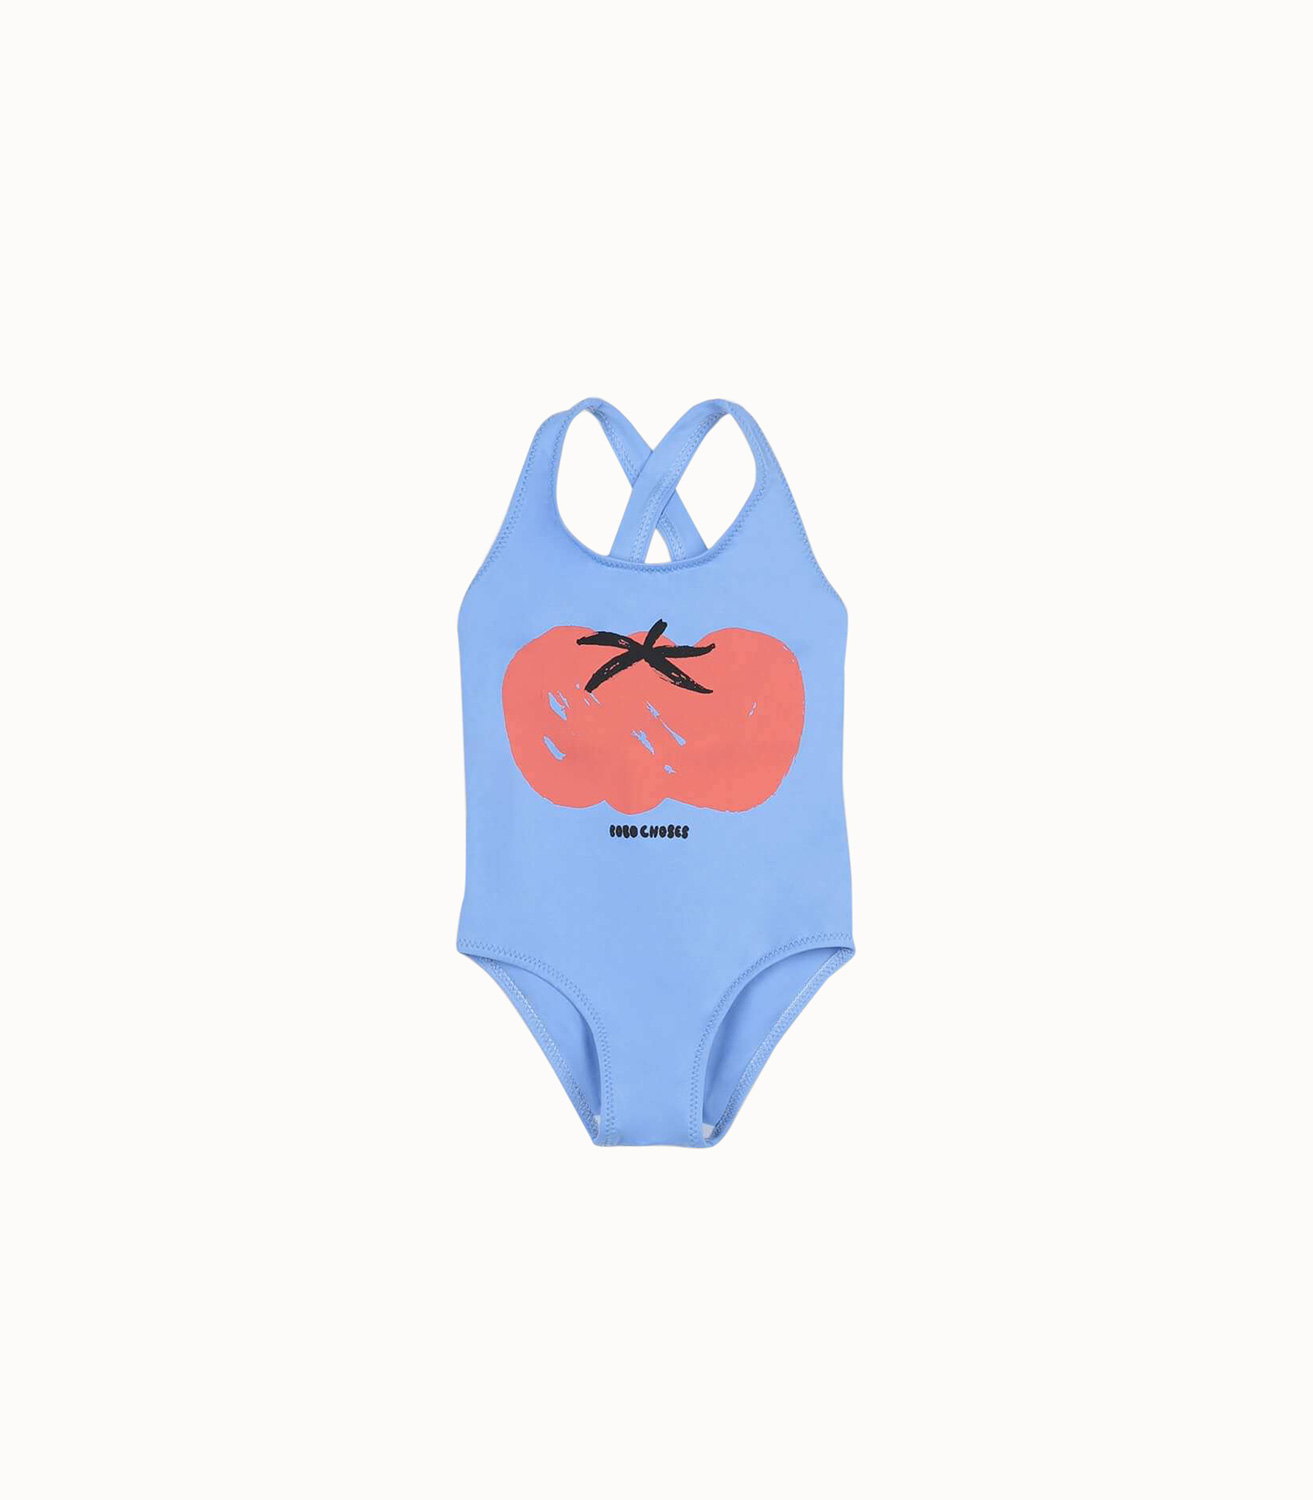 Bobo Choses One Piece Swimsuit With Print Playground